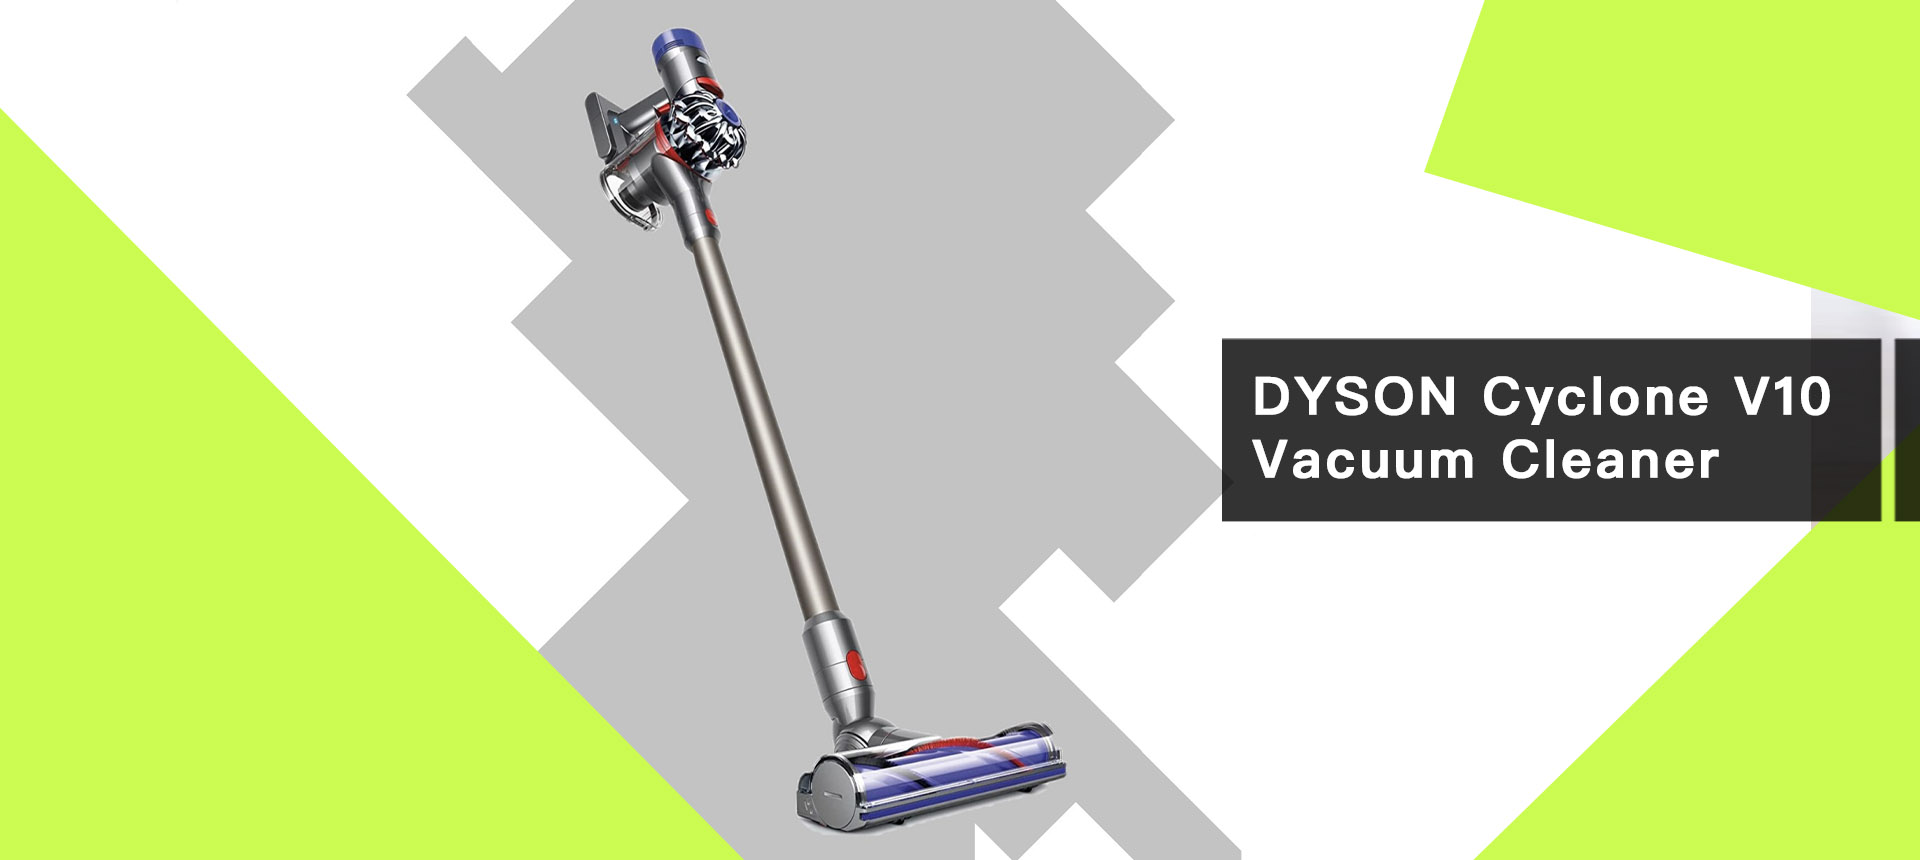 DYSON Cyclone V10 Vacuum Cleaner